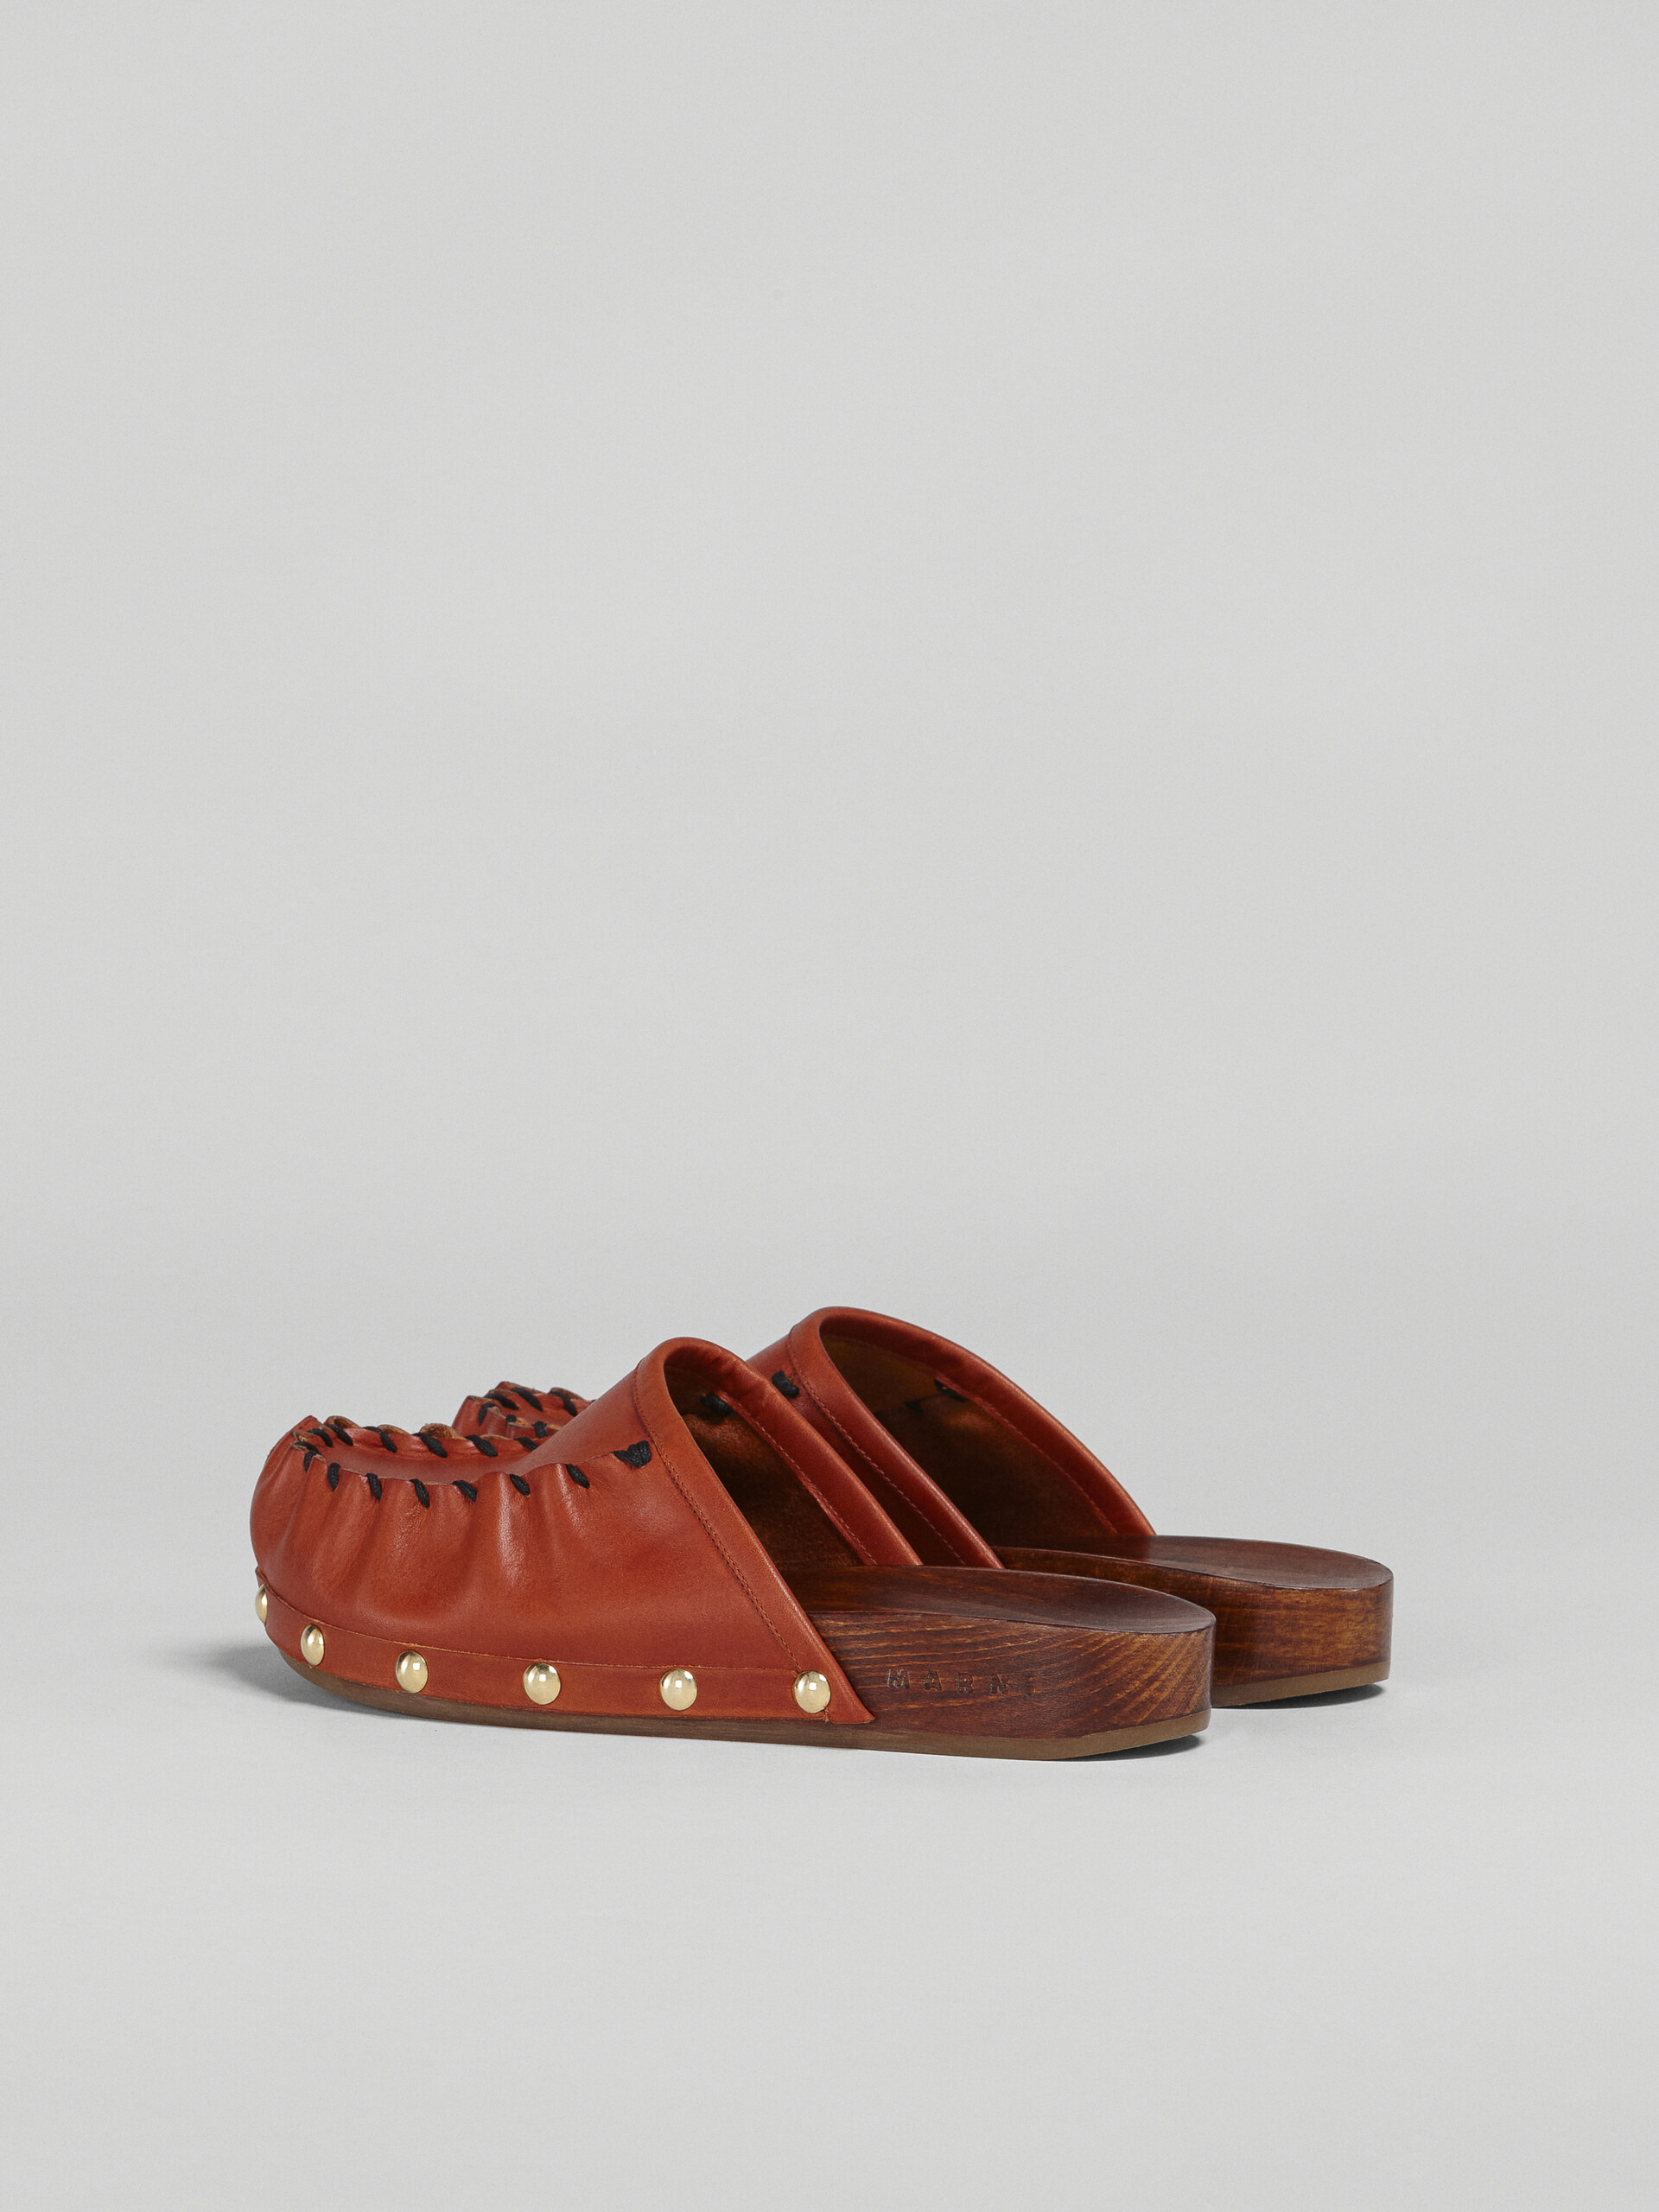 Vegetable-tanned leather and wood clog - Clogs - Image 3